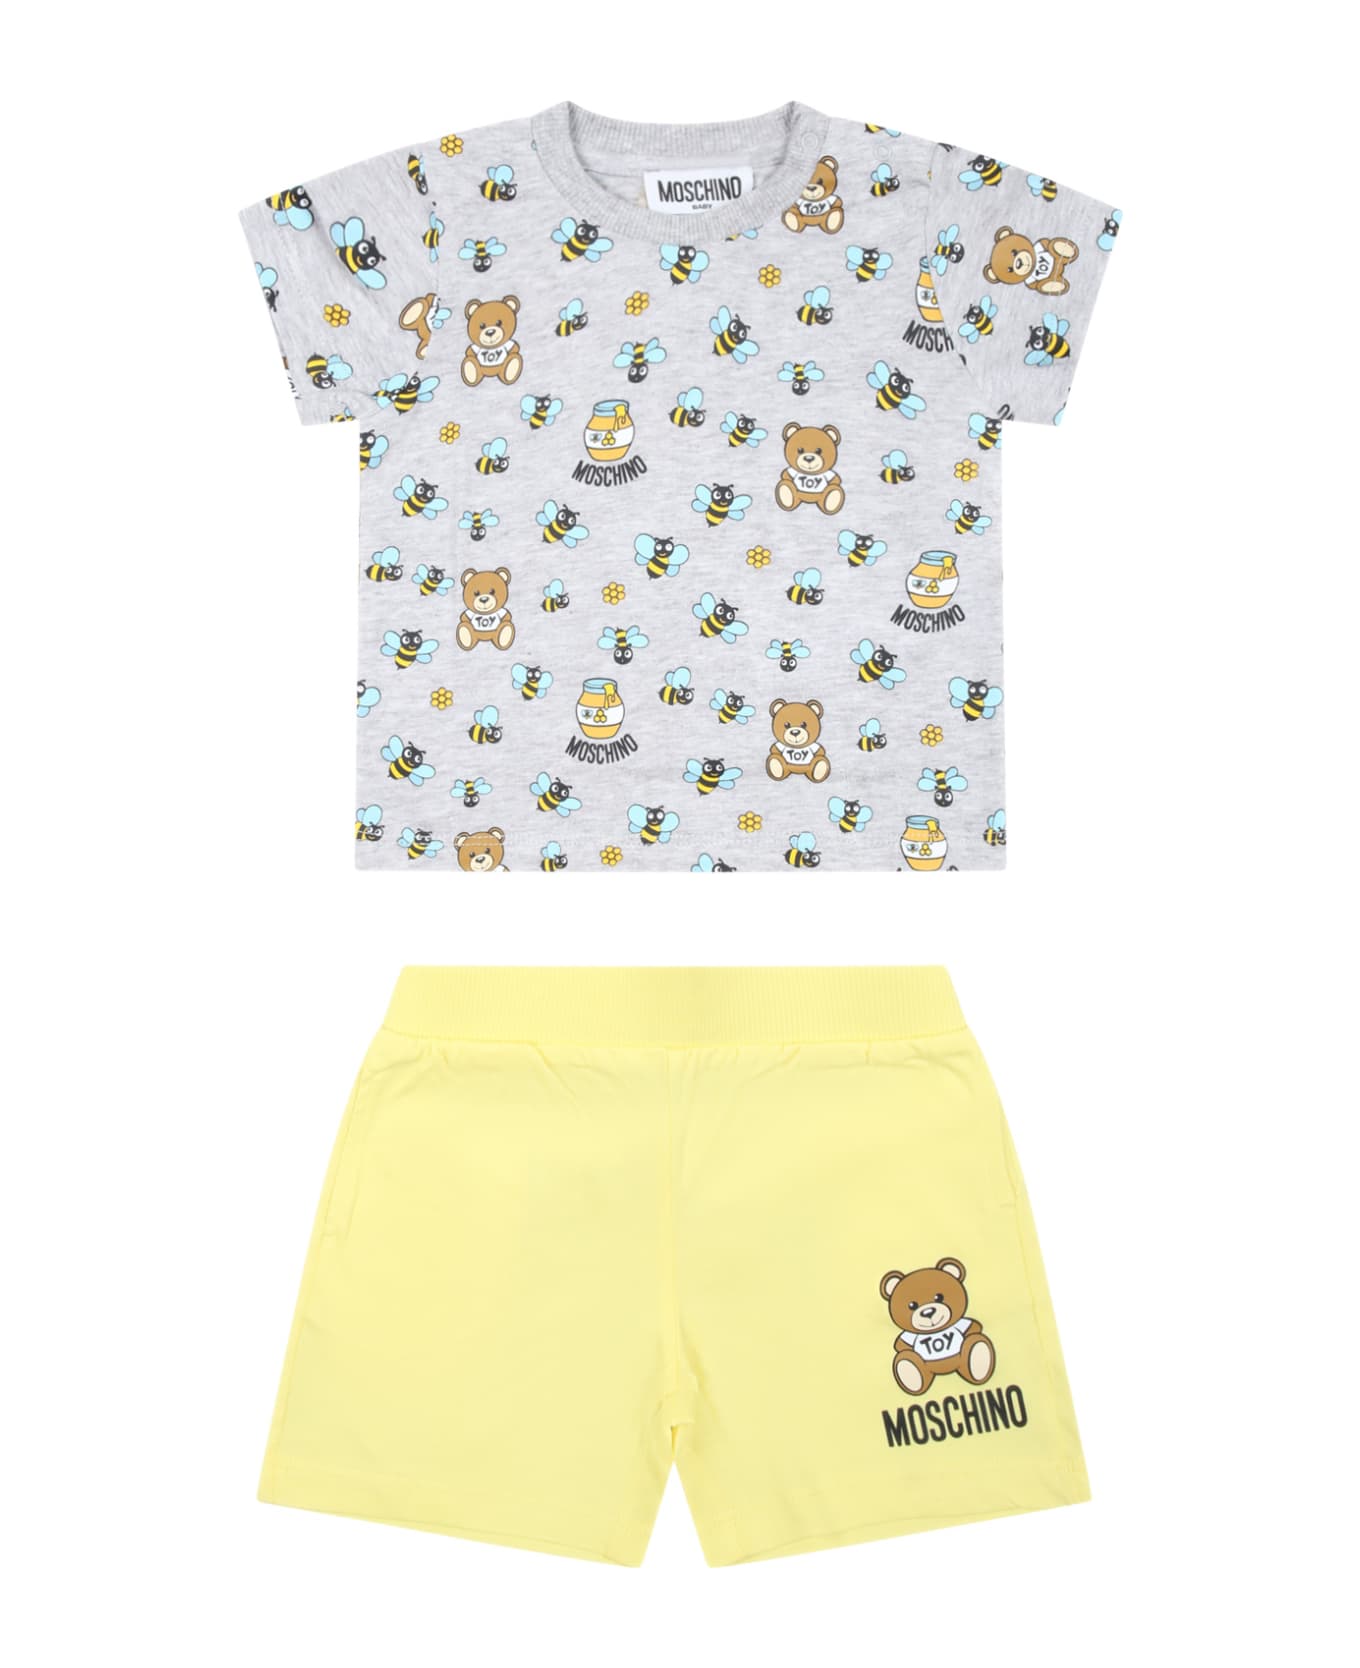 Moschino Multicolor Set For Baby Boy With Teddy Bear - Multicolor ボトムス